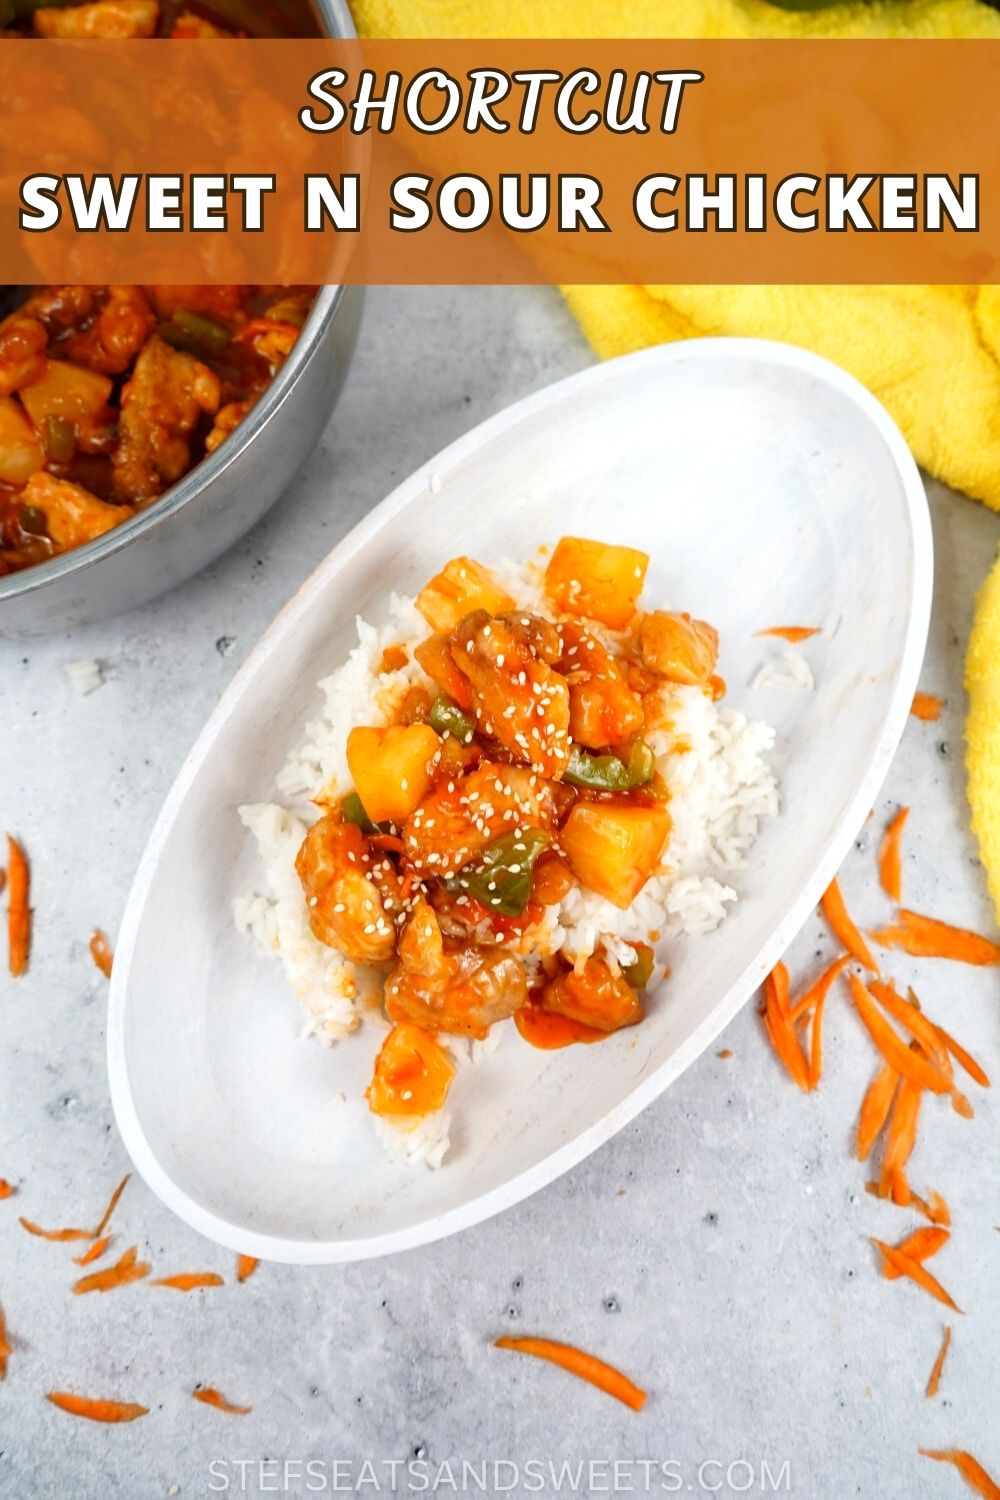 How to make shortcut sweet and sour chicken